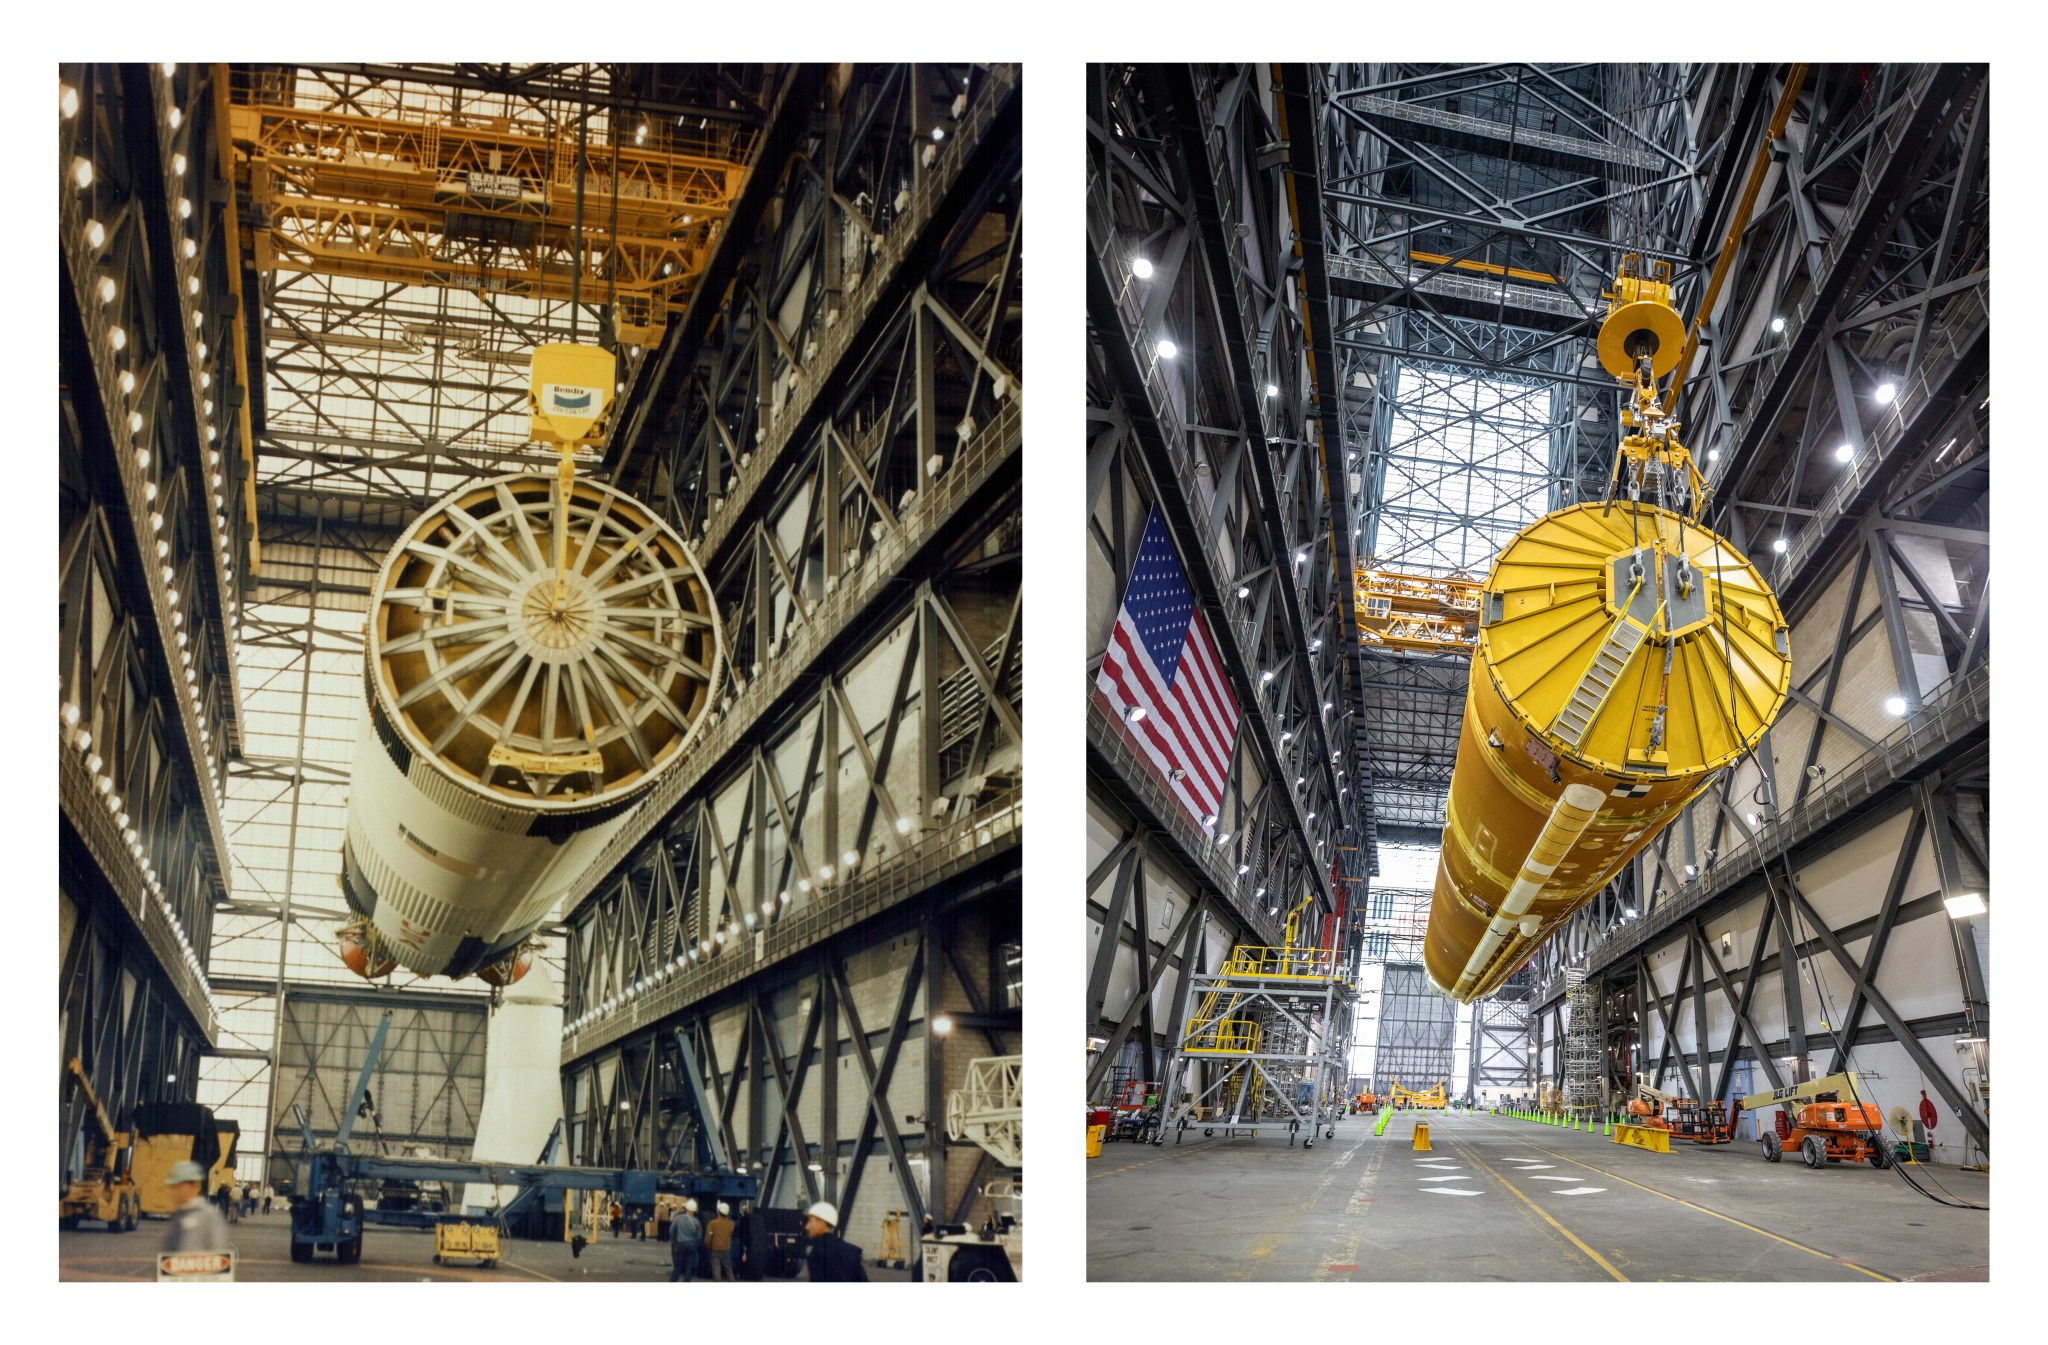 A side-by-side comparison of the Saturn V first stage used for Apollo missions to the Moon and the Space Launch System core stage that will be used for Artemis missions to the Moon.